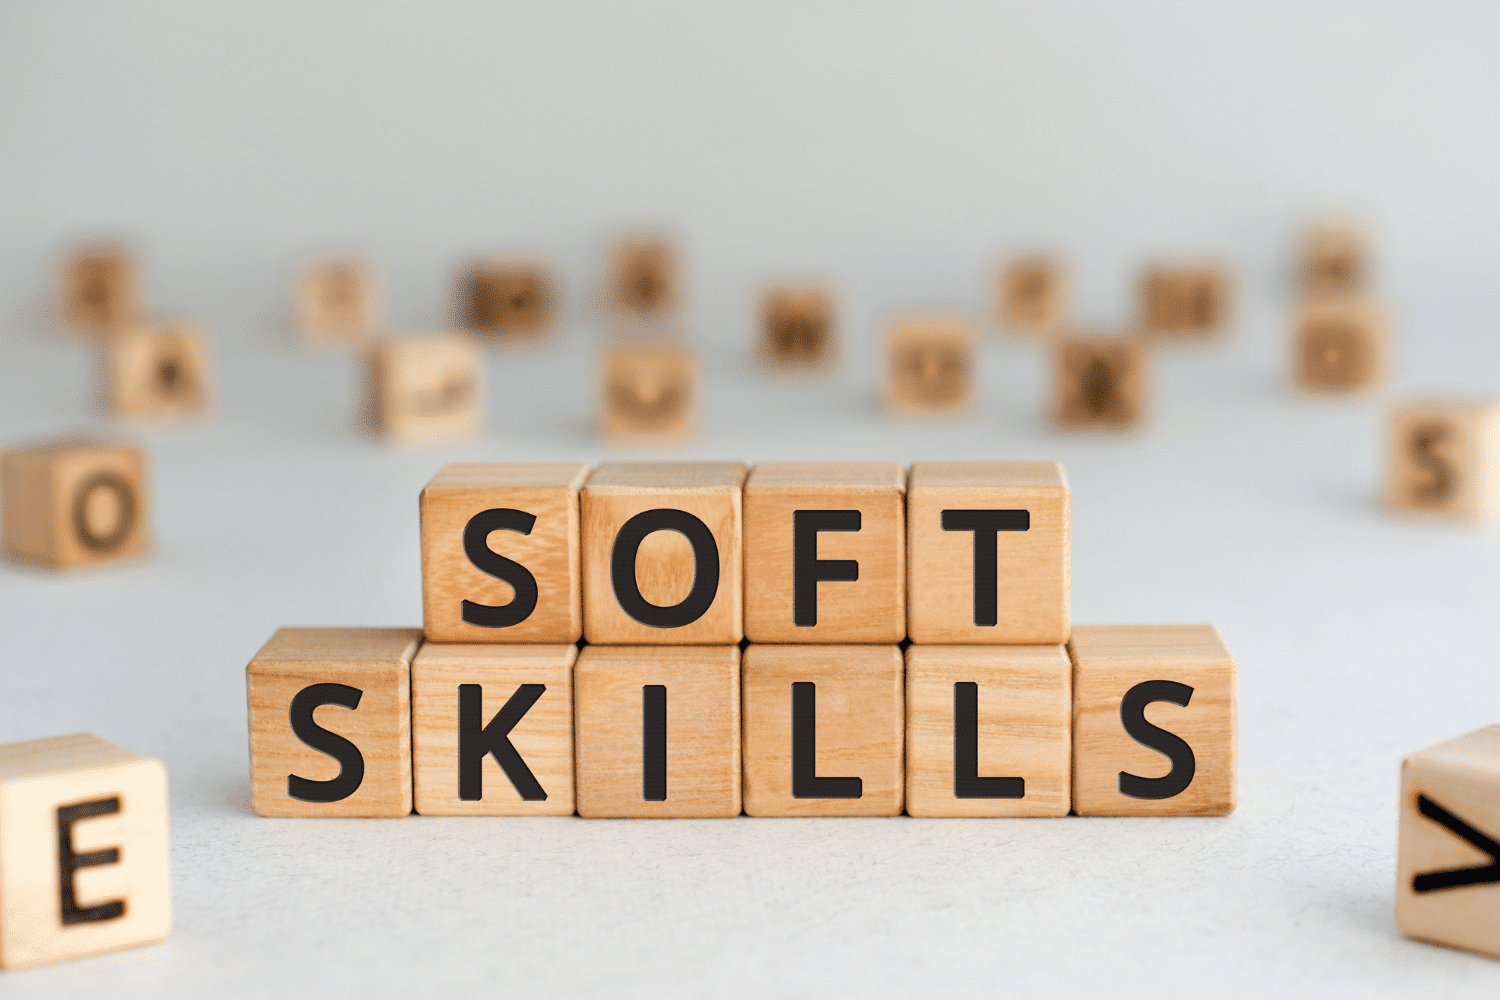 Small wooden blocks arranged to spell out SOFT SKILLS